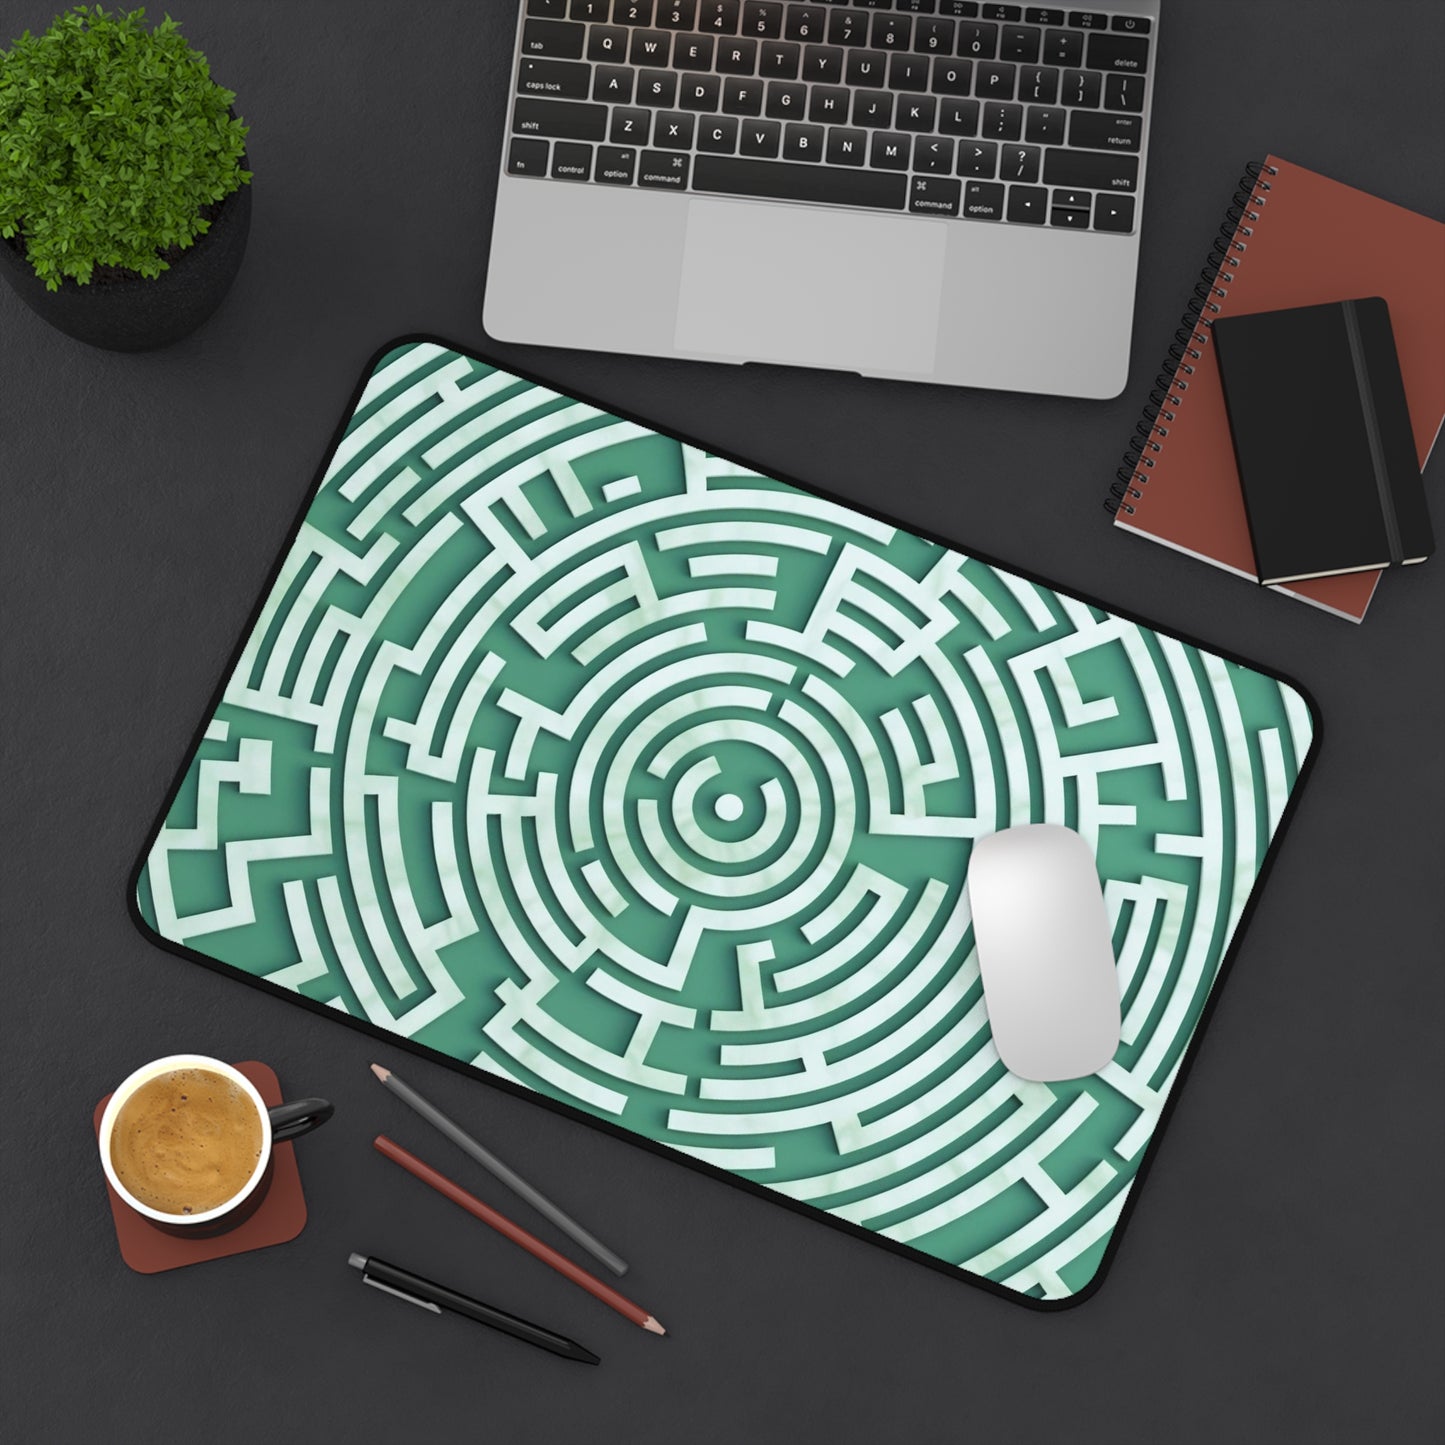 Maze Desk Mat, Green and White Maze Desk Pad, Trendy Workspace, Labyrinth Desk Mat, Extra Large Mouse Pad, Keyboard Mat, Desk Accessory